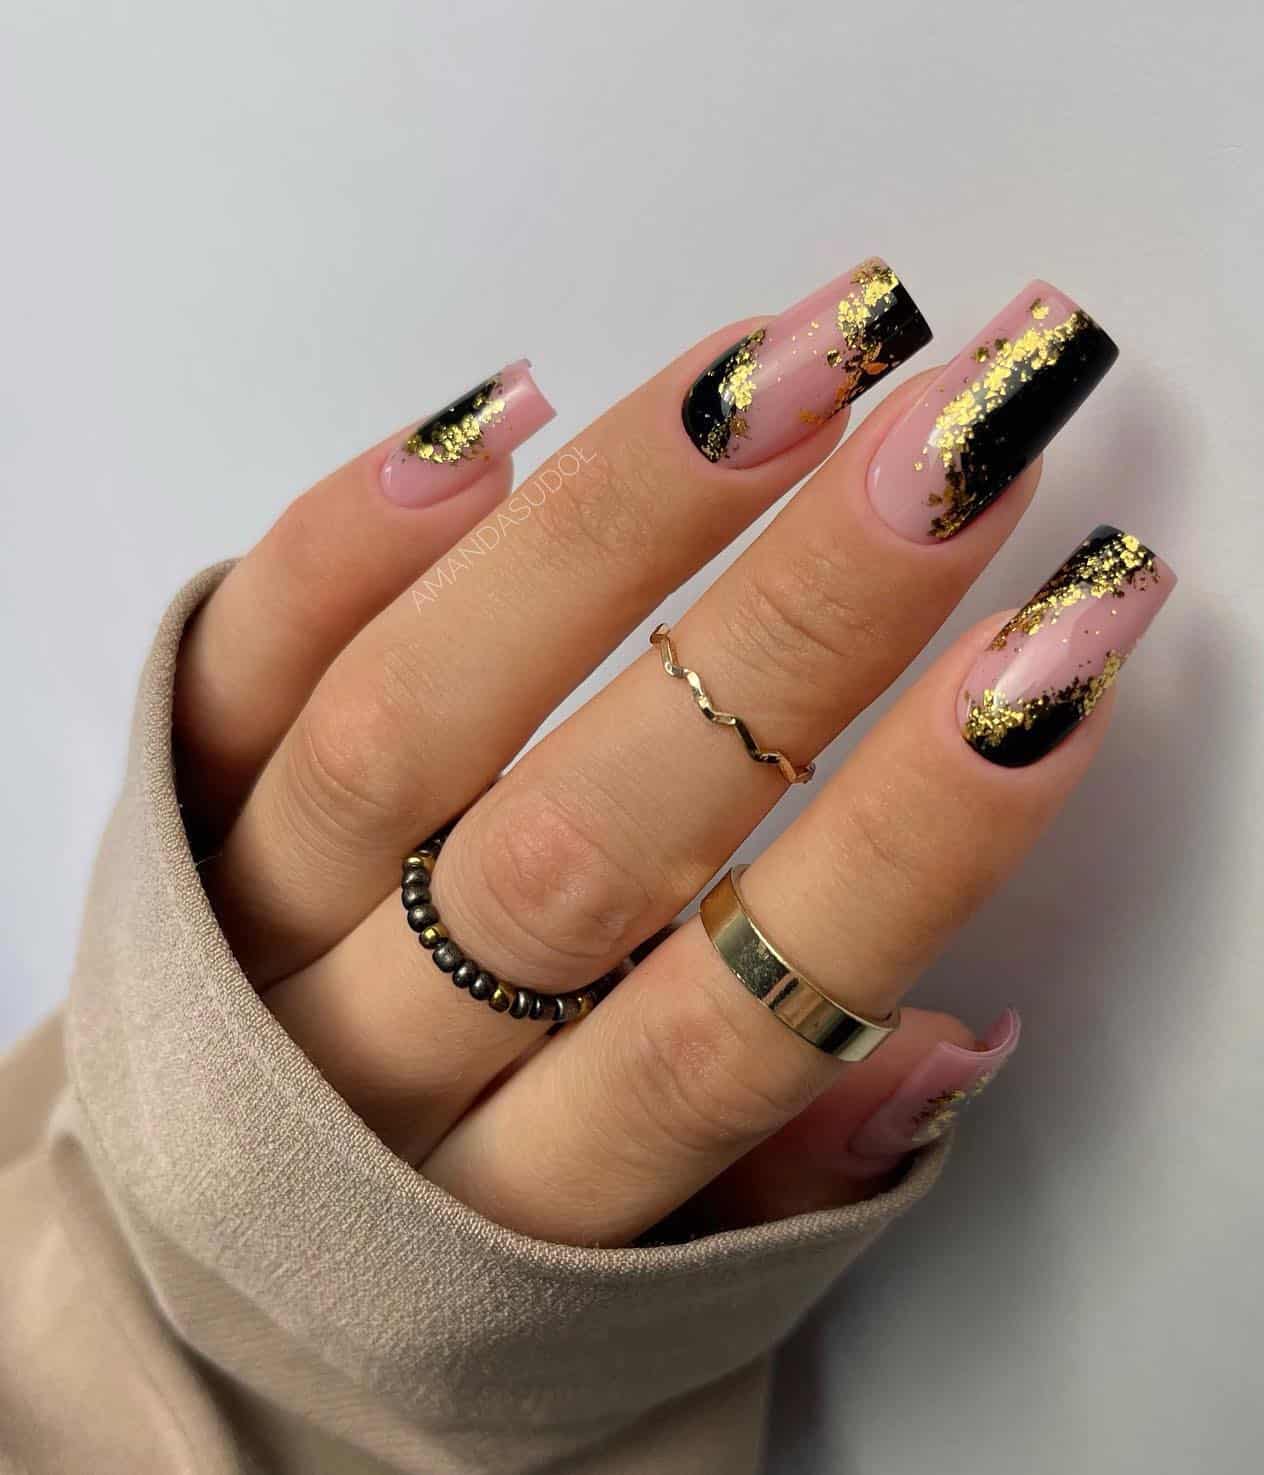 Long square nails with nude and black polish and gold glitter details